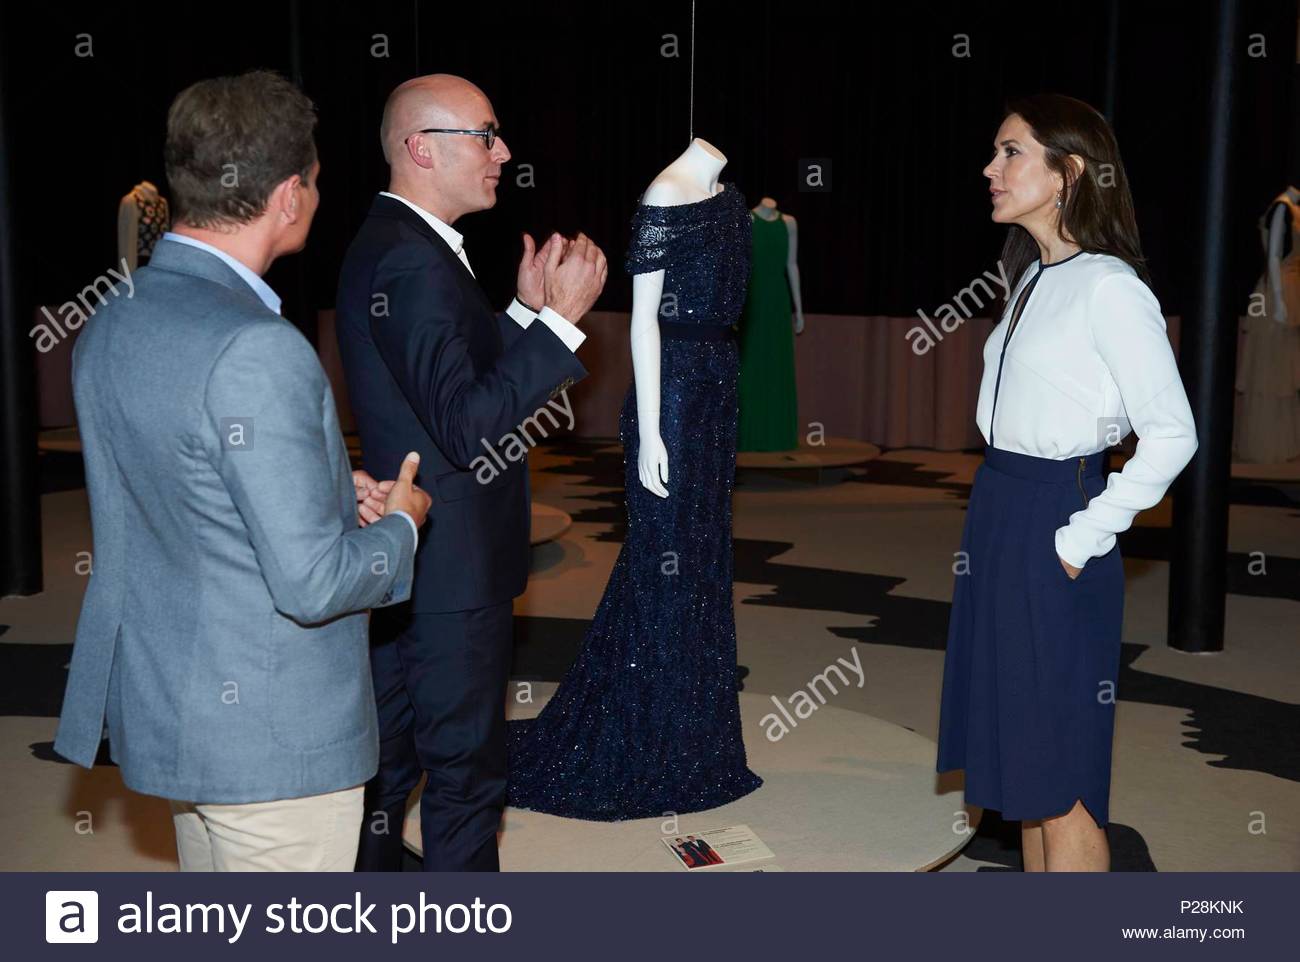 jesper-hovring-chris-pedersen-crown-princess-mary-hrh-crown-princess-mary-of-denmark-visits-the-exhibition-danish-fashion-now-at-brandts-in-odense-june-19-2015-10-of-her-beautiful-dresses-created-by-danish-designers-are-displayed-at-the-exhibition-code-07652lhl-photo-lars-h-laursen-all-over-press-denmark-P28KNK.jpg